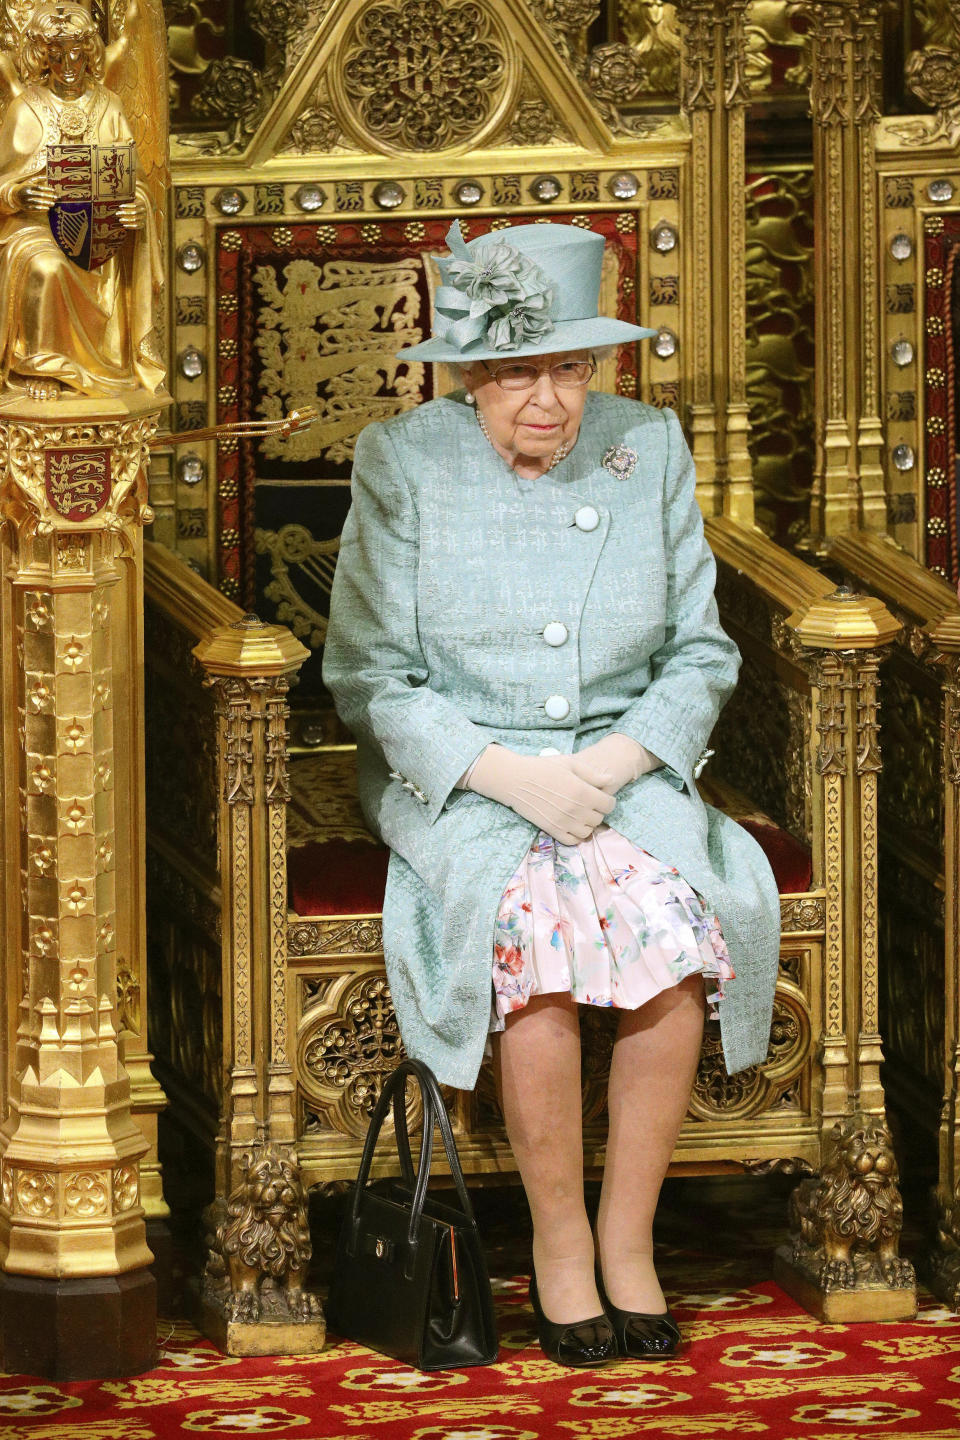 Britain's Queen Elizabeth II sits in the chamber ahead of the State Opening of Parliament, in the House of Lords at the Palace of Westminster in London, Thursday Dec. 19, 2019. Queen Elizabeth II will formally open a new session of Britain's Parliament on Thursday, with a speech giving the first concrete details of what Prime Minister Boris Johnson plans to do with his commanding House of Commons majority. (Aaron Chown, Pool via AP)